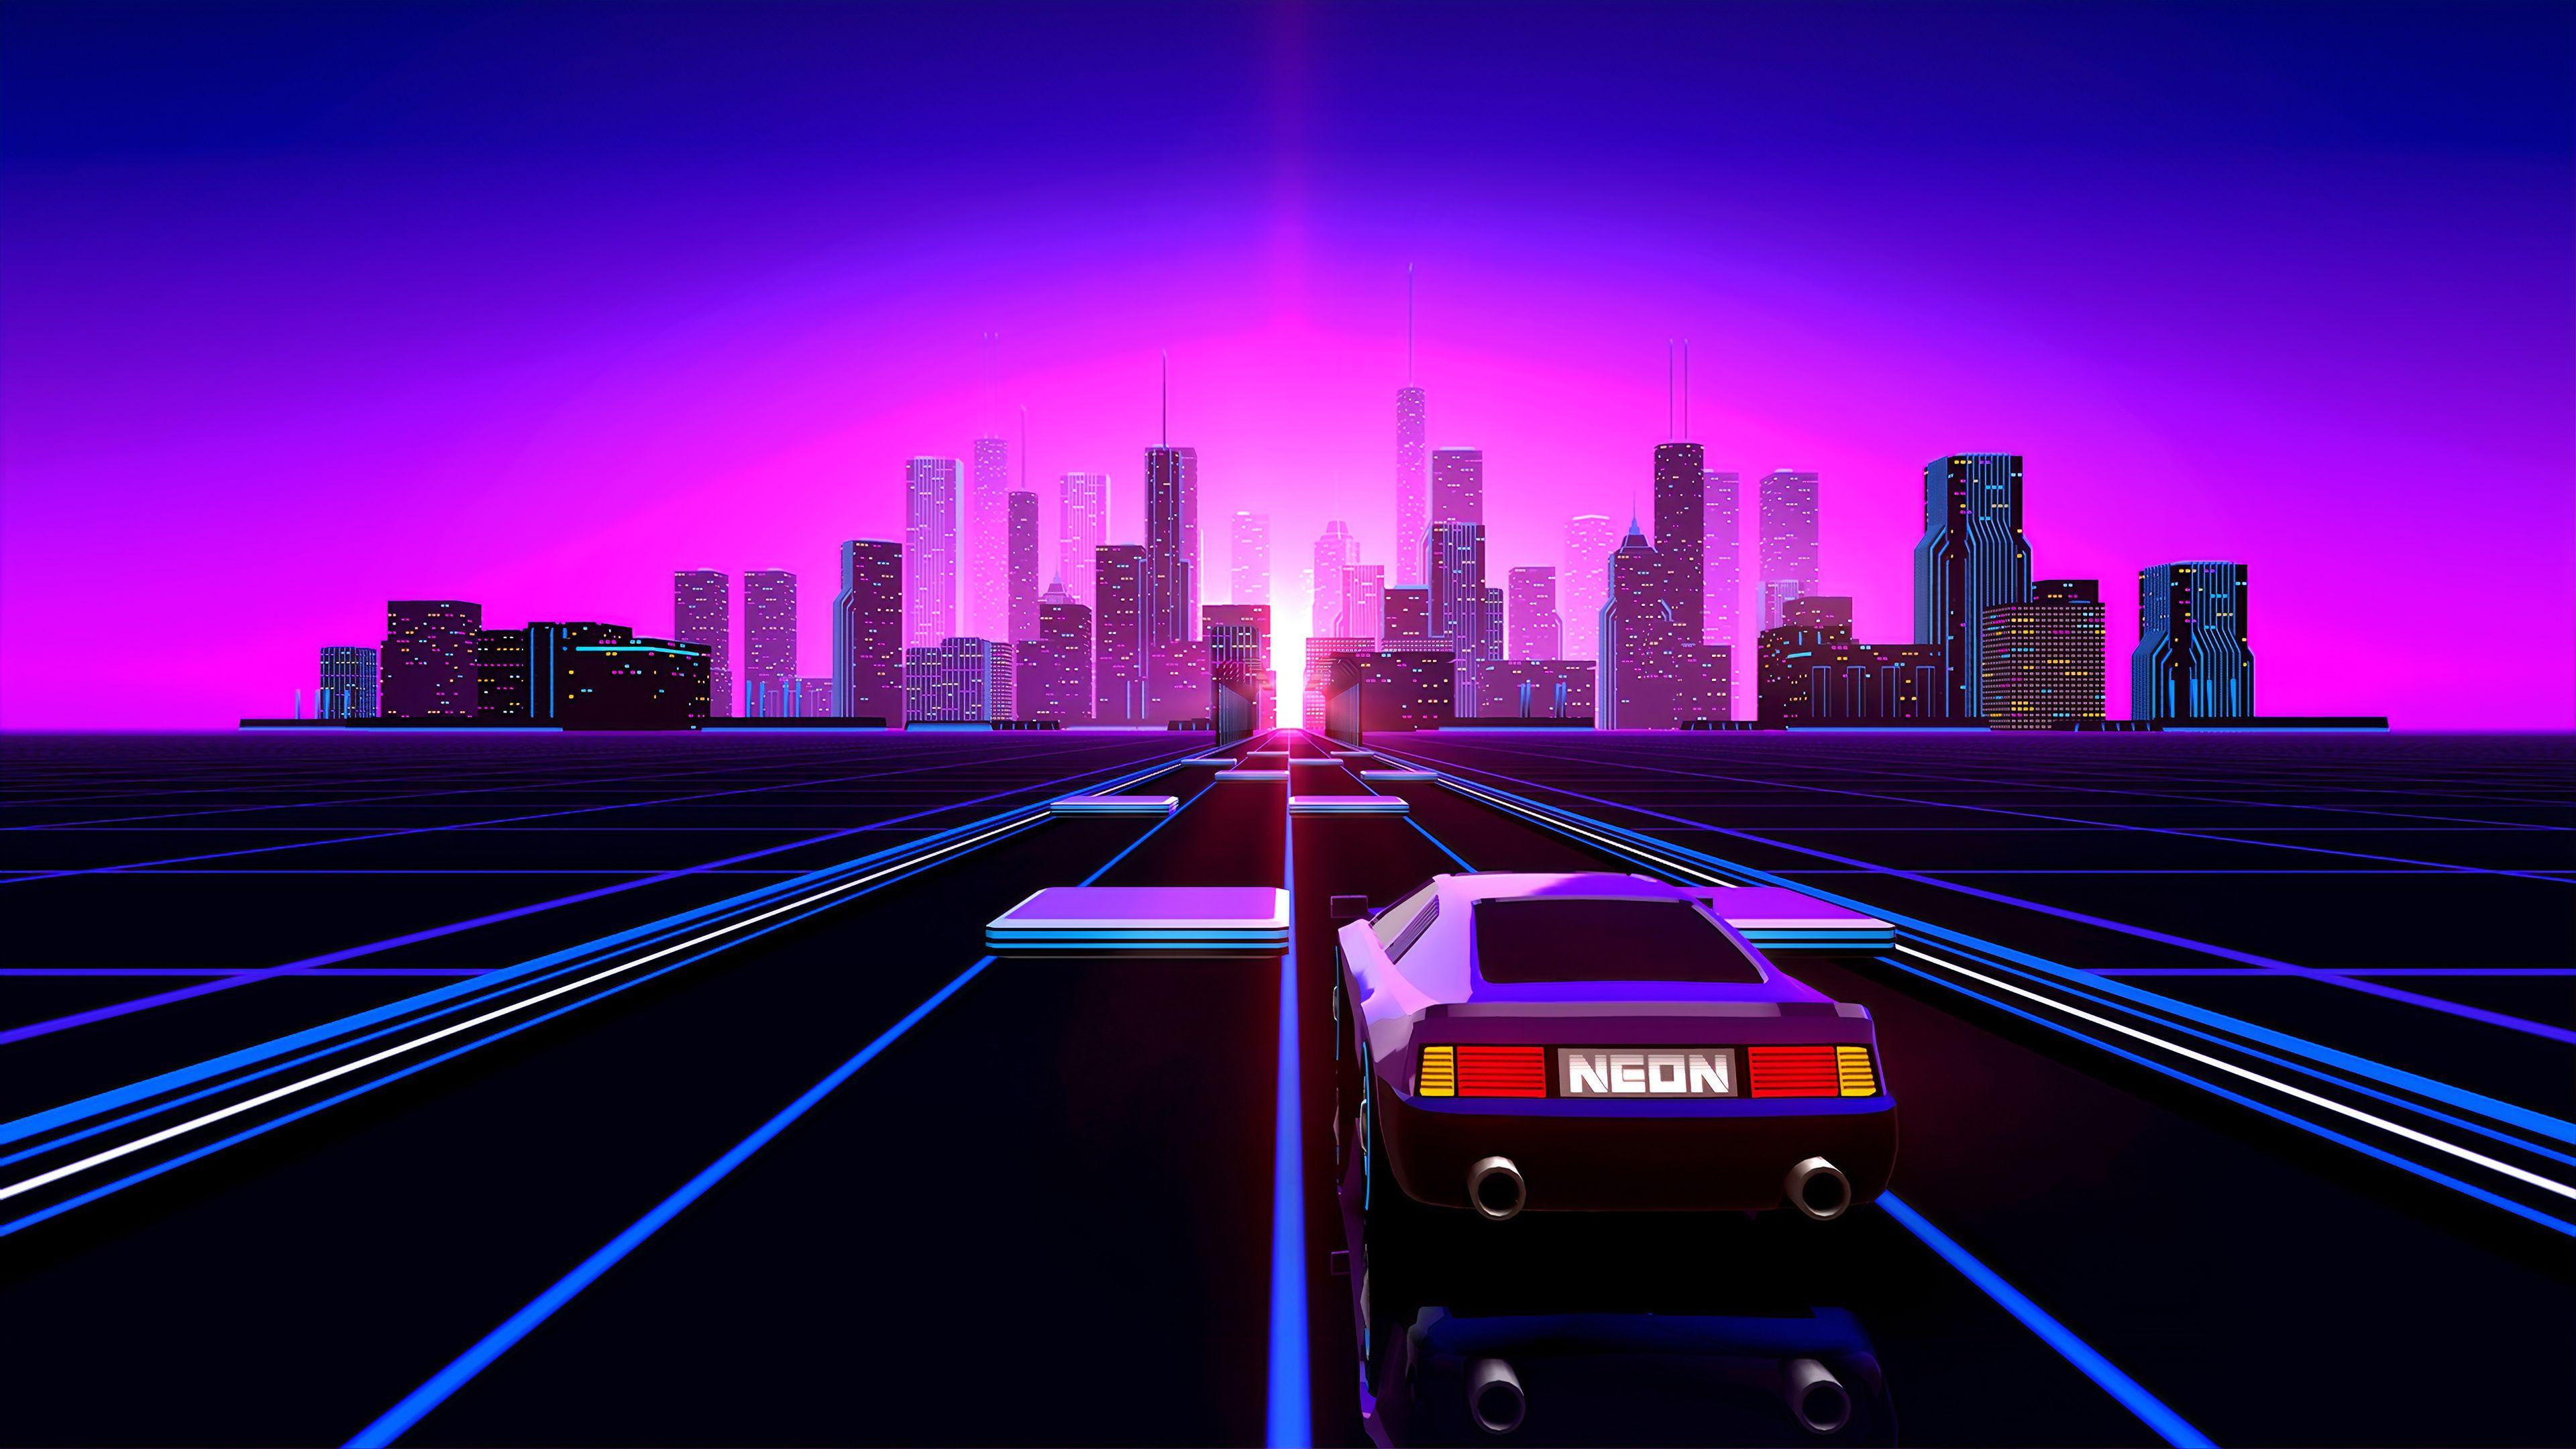 Way To Retrowave City, HD Artist, 4k Wallpaper, Image, Background, Photo and Picture